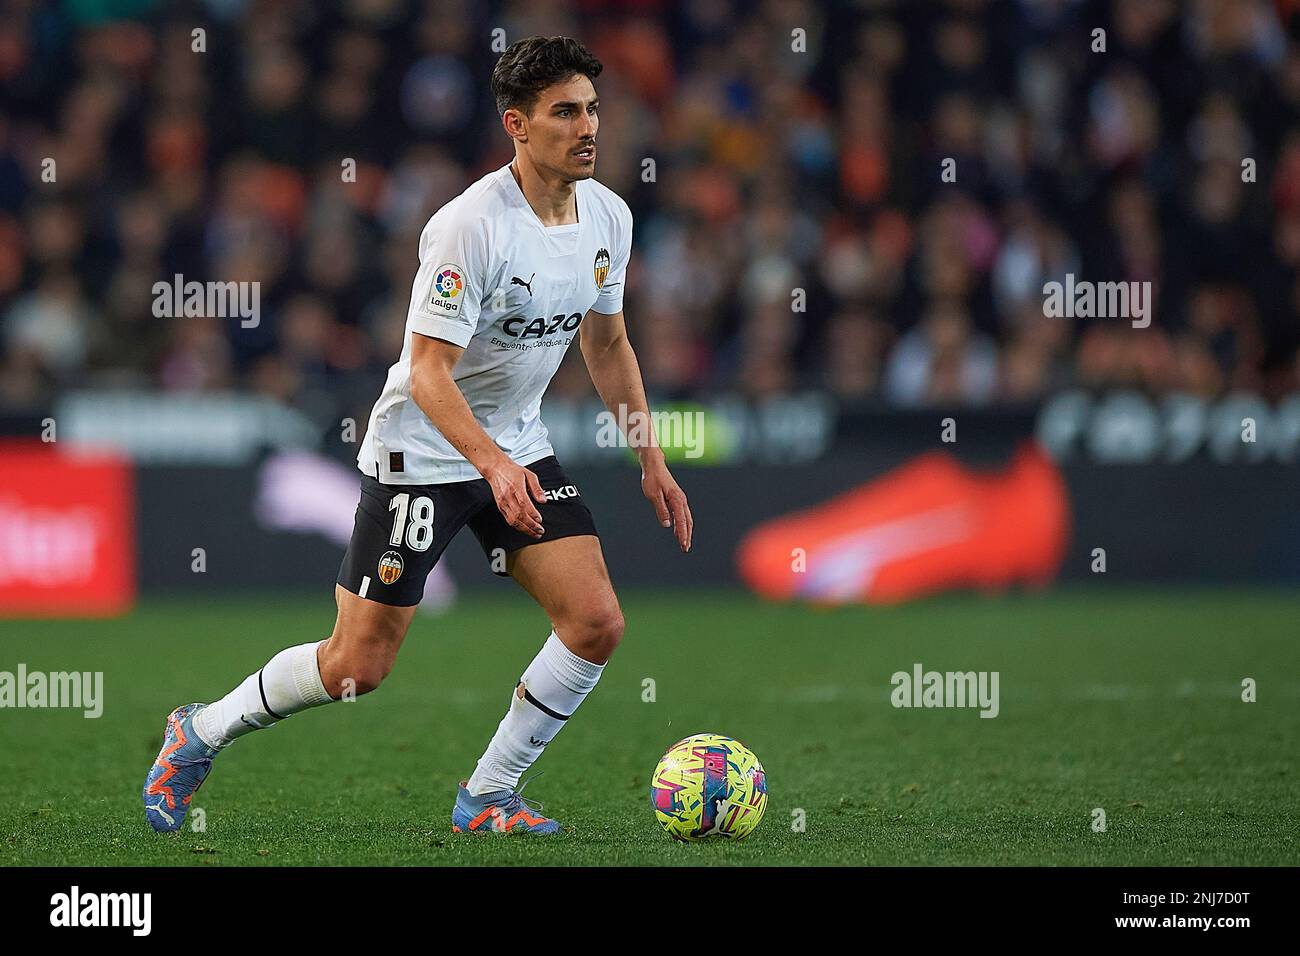 Andre Almeida of Valencia CF during the La Liga match between Valencia and Athletic Club played at Mestalla Stadium on February 11 in Valencia, Spain. (Photo by PRESSIN) Stock Photo